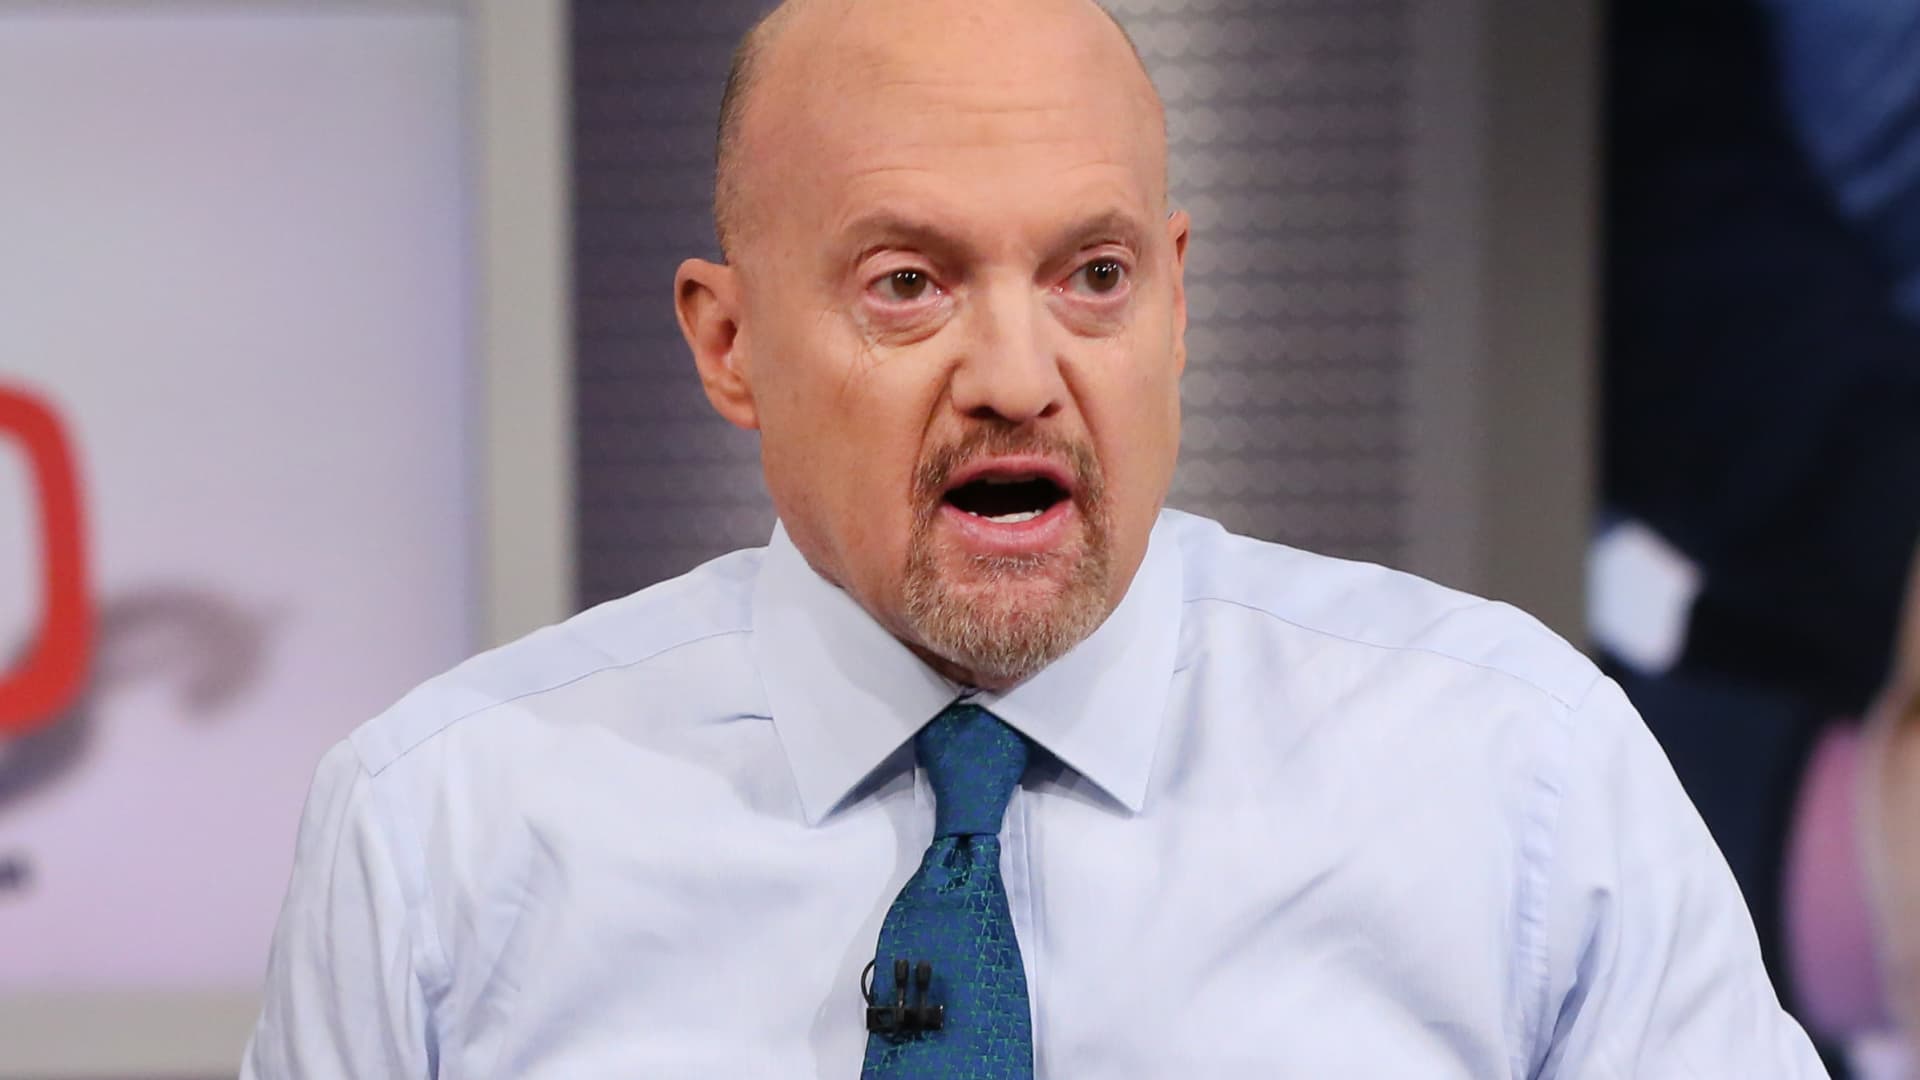 Companies ‘can’t really plan’ in muddled economic cycles, Jim Cramer warns investors